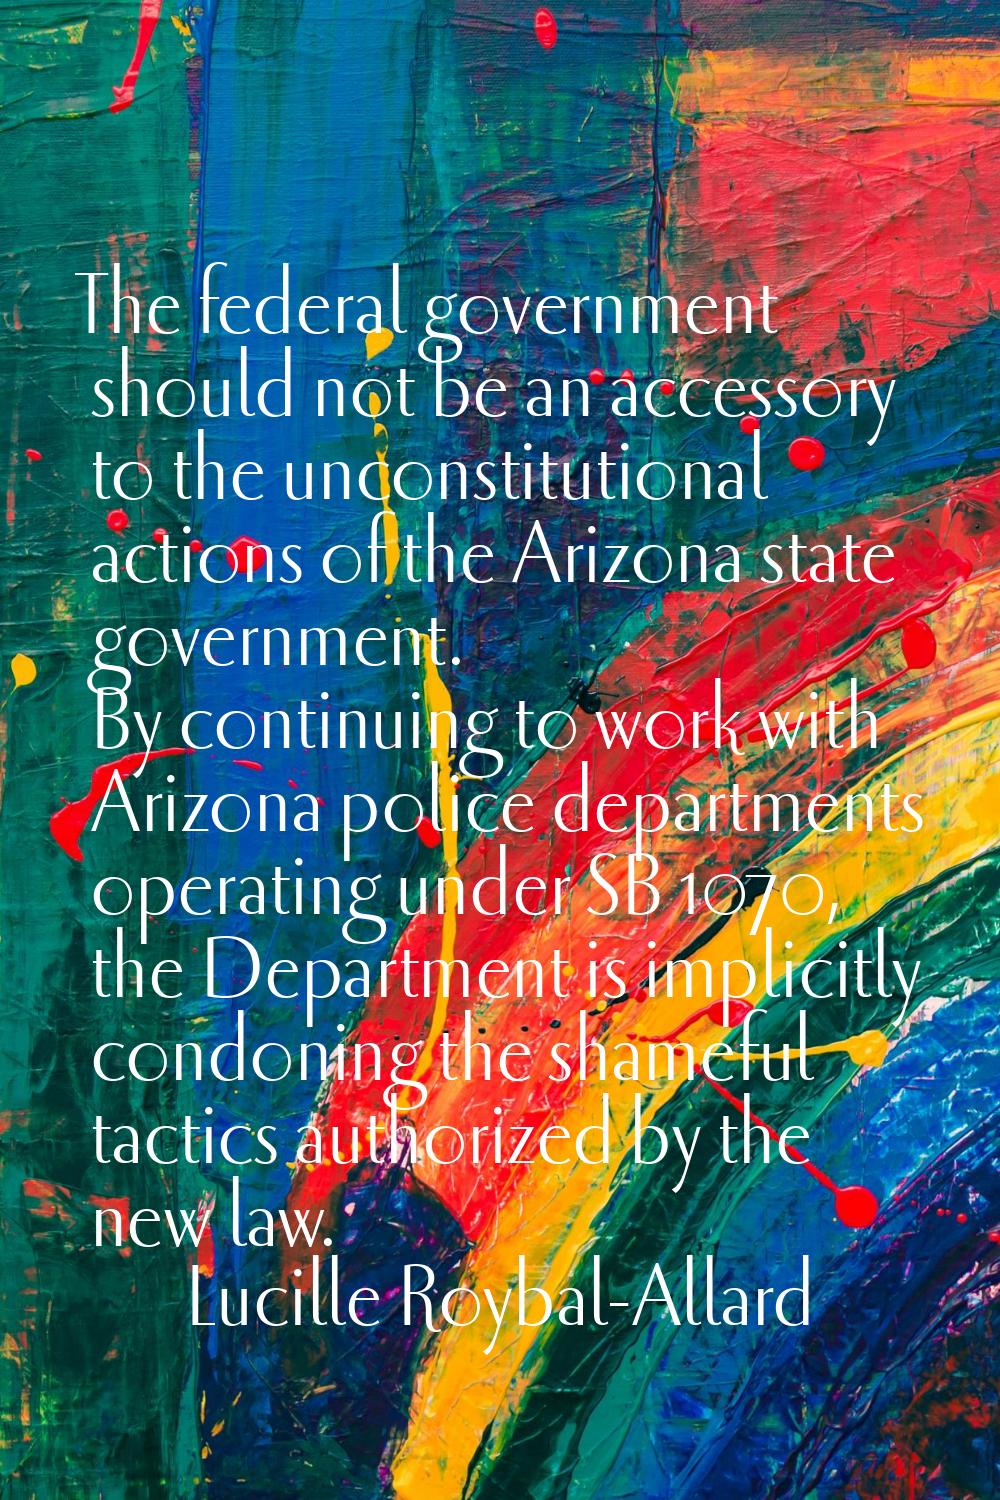 The federal government should not be an accessory to the unconstitutional actions of the Arizona st